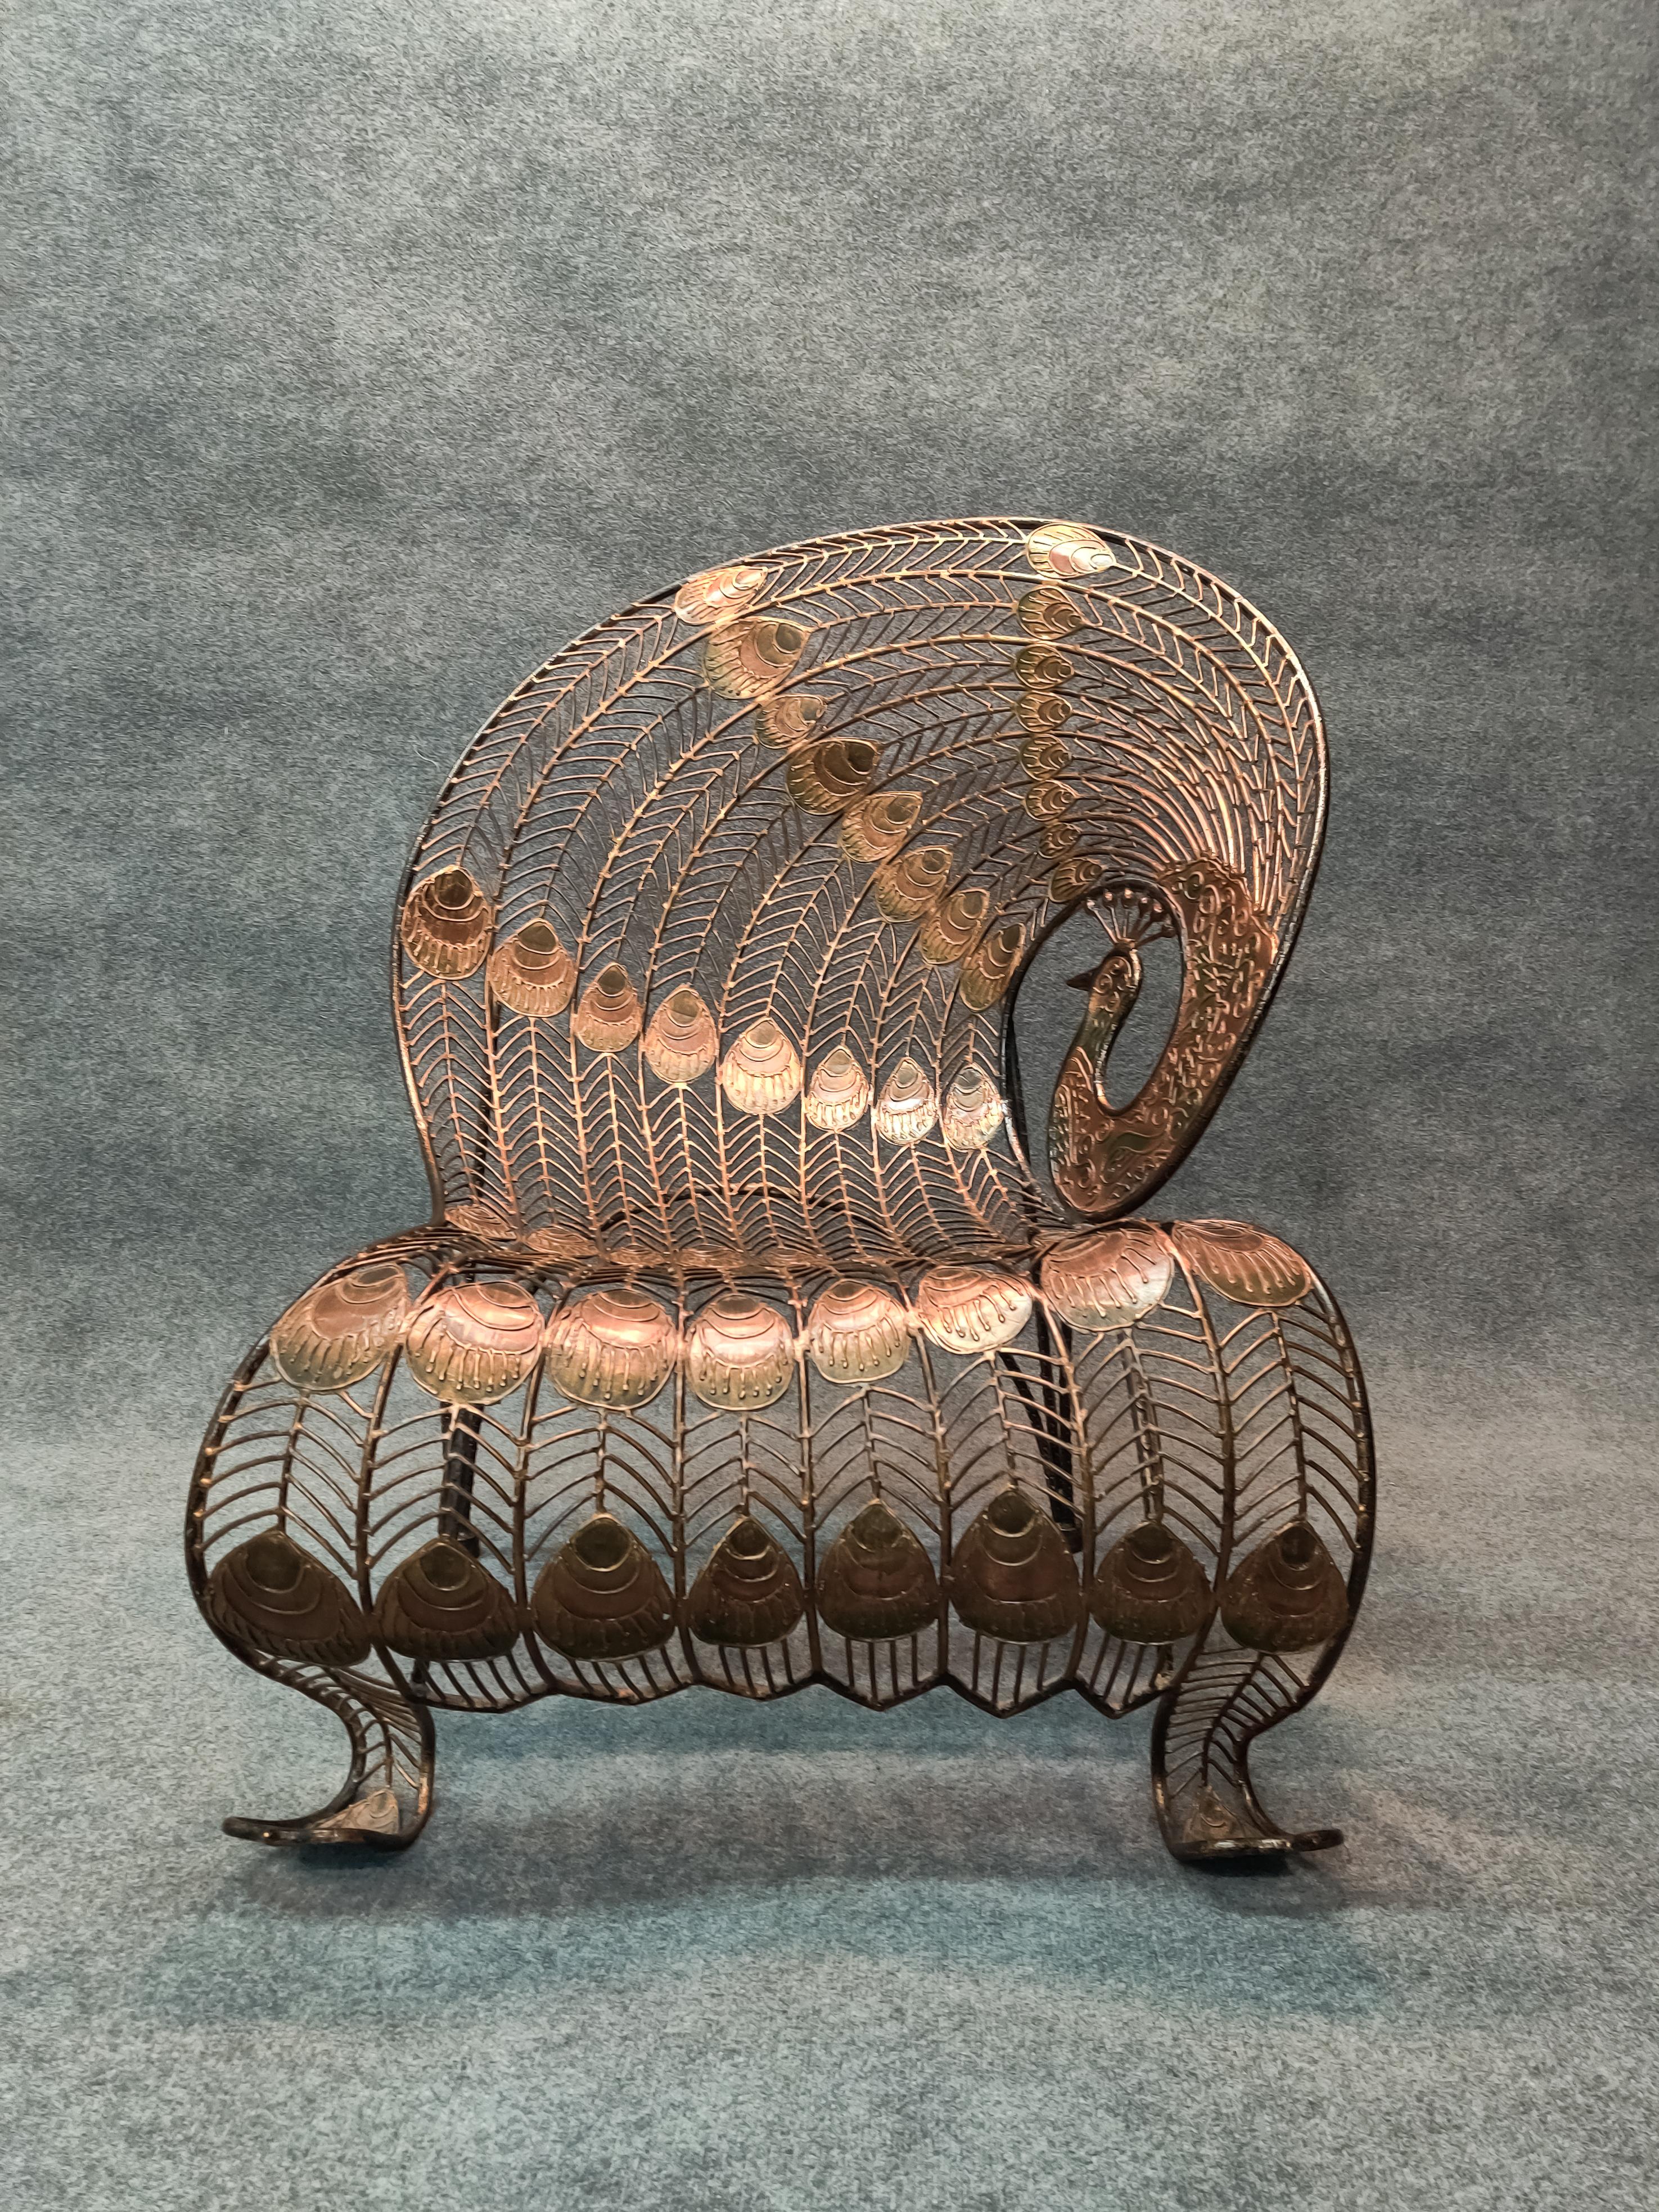 Stunning and rare, this heavy wrought iron peacock chair is more sculpture than seating. Intricate pattern of splines and peacock 